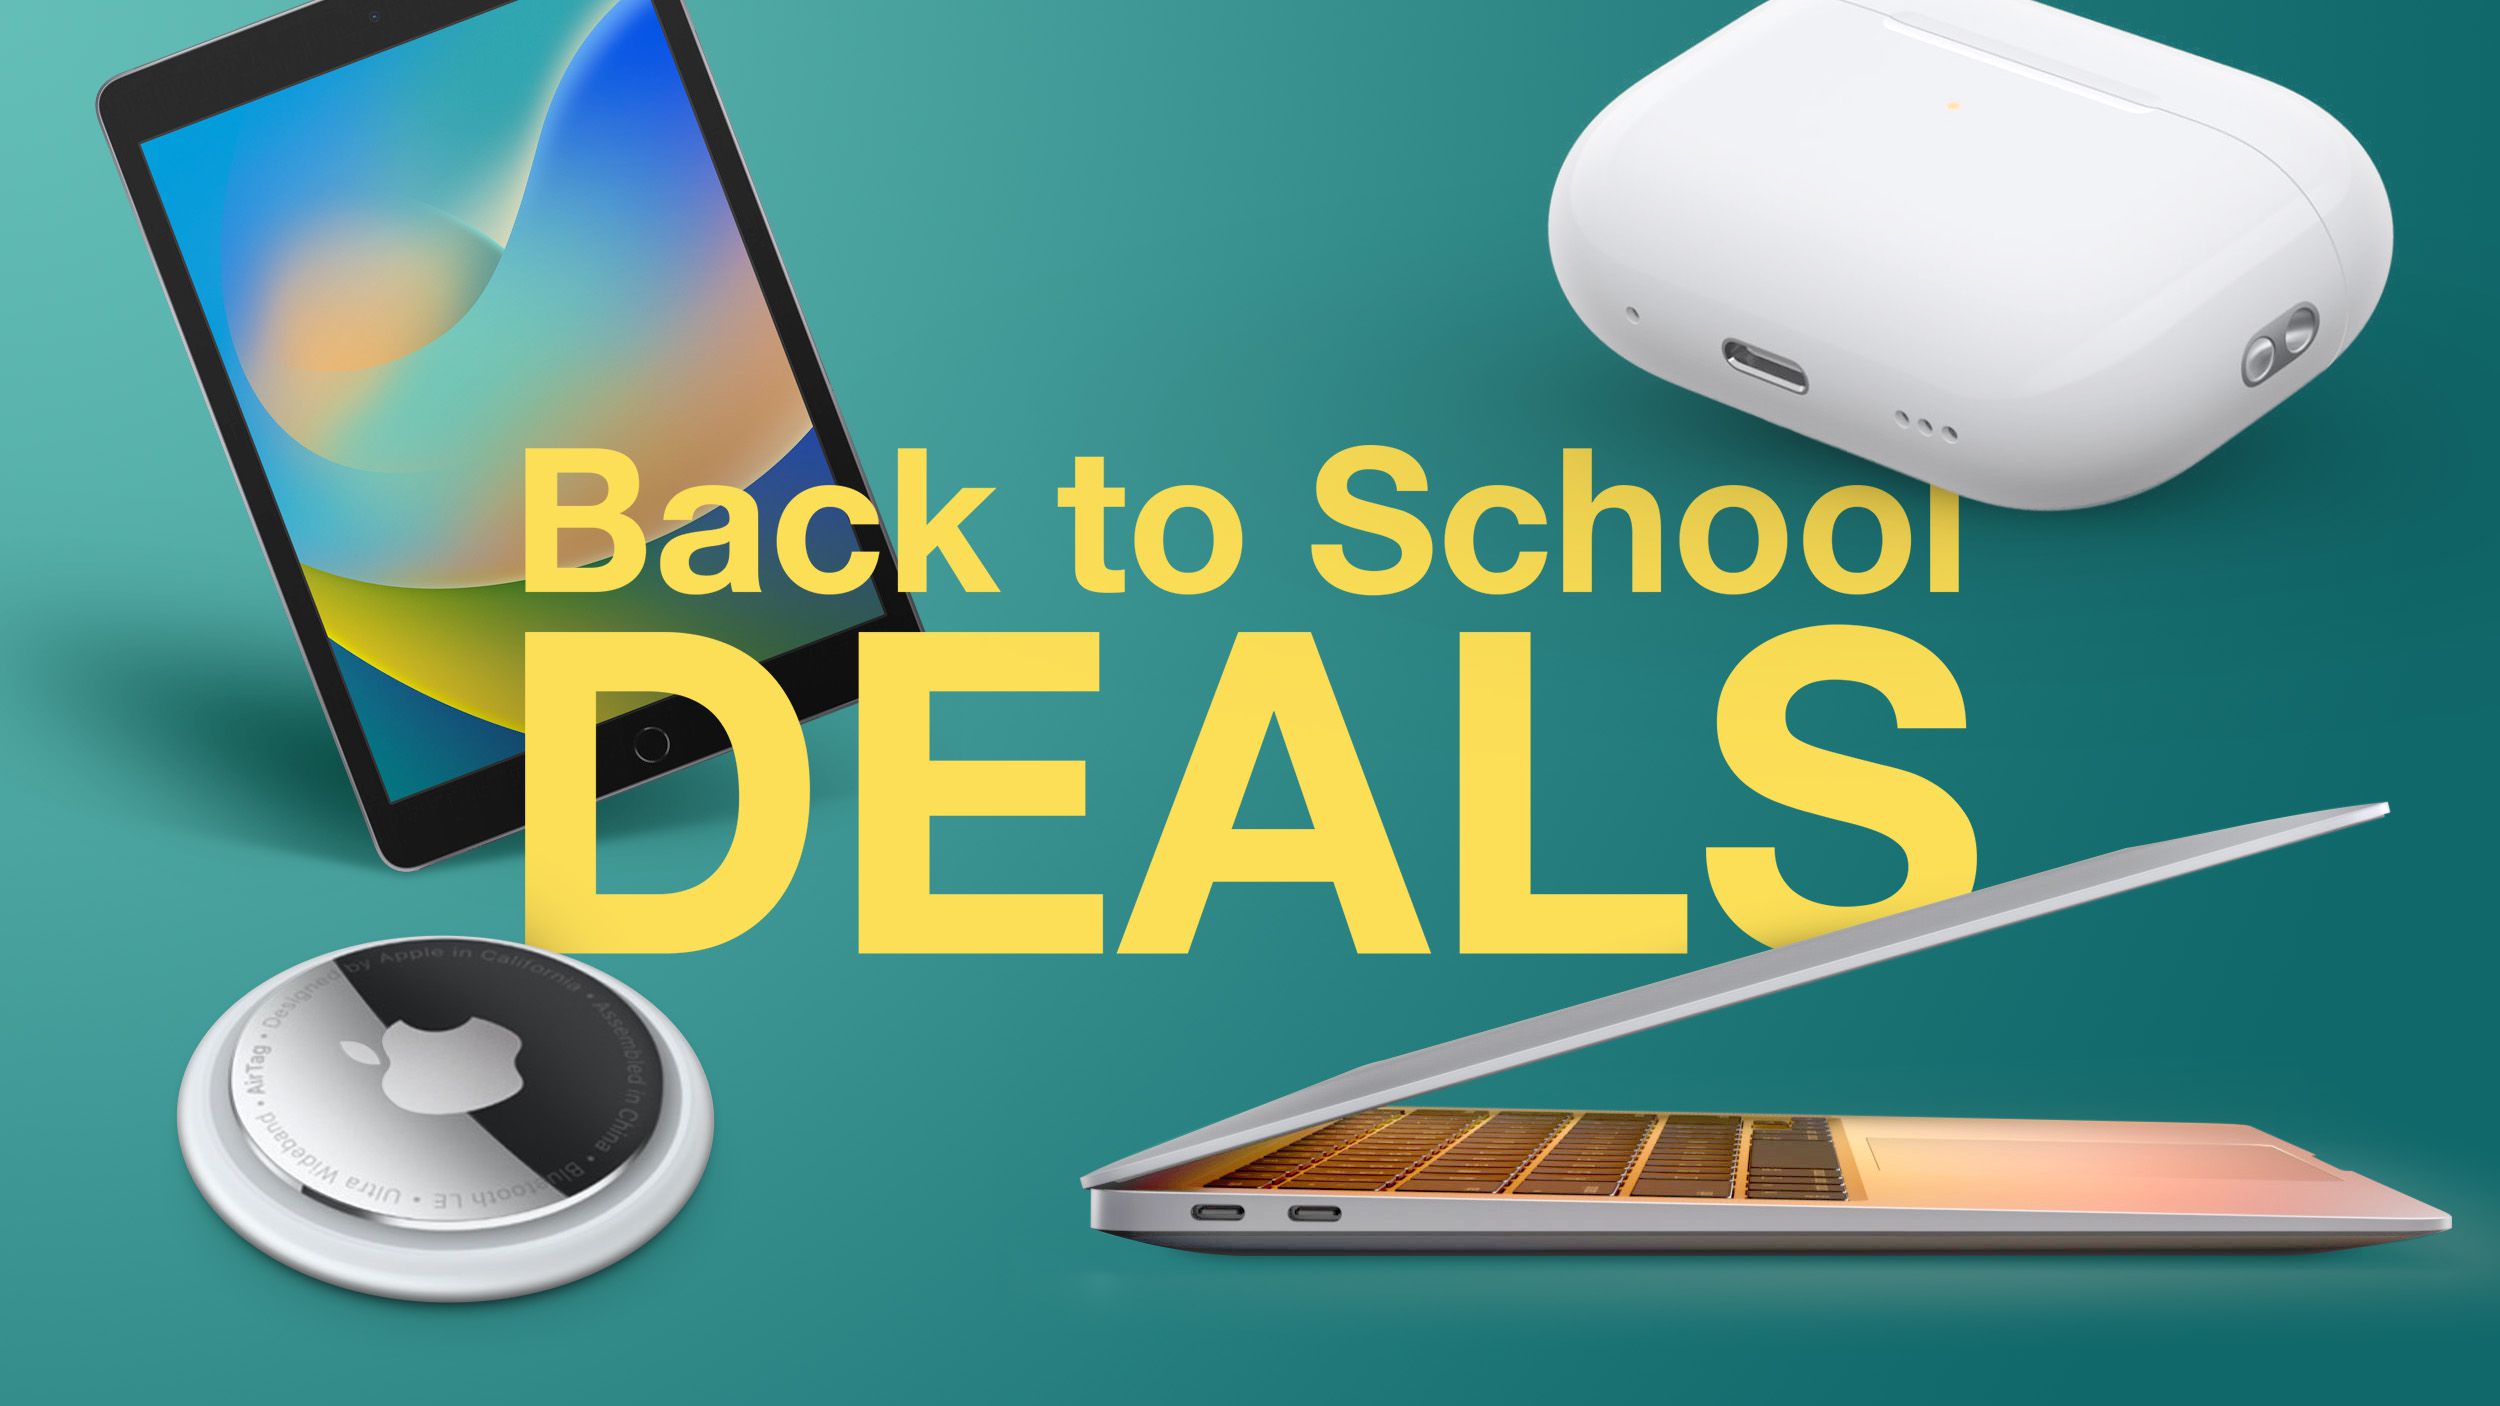 Apple Back to School 2023: When and what is Apple's back to uni